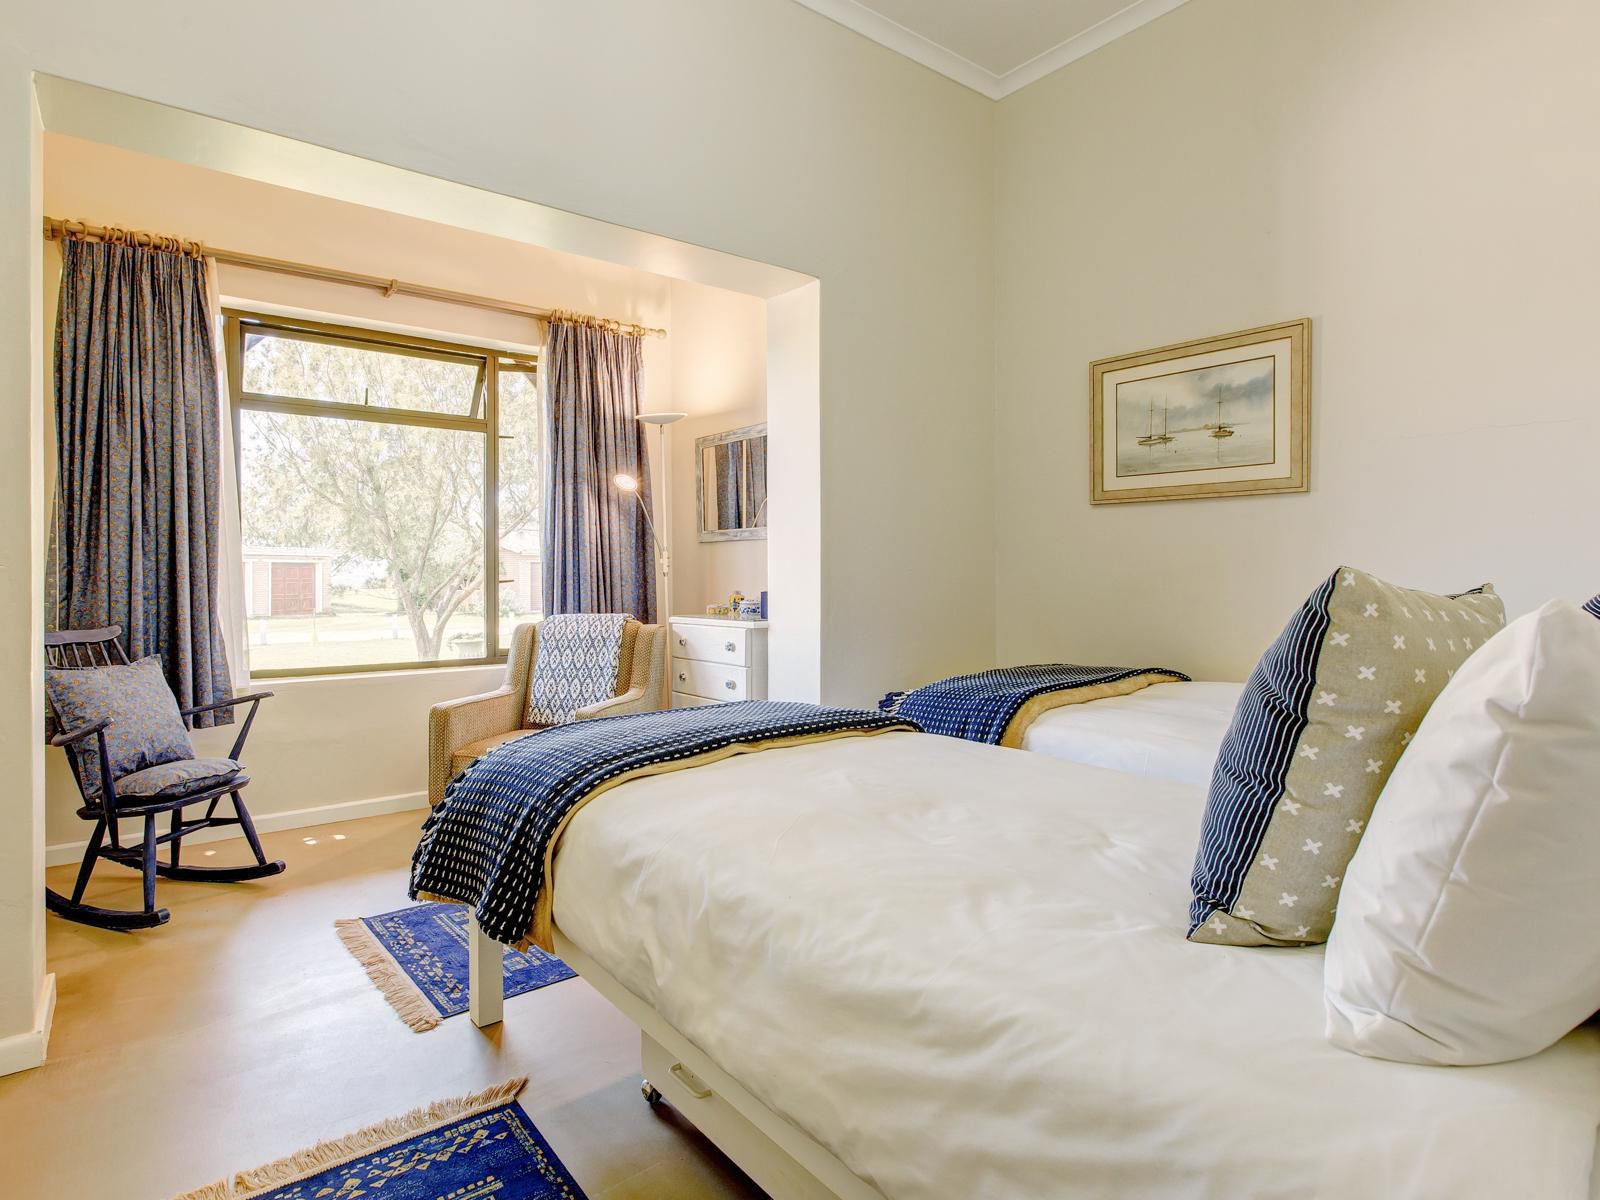 Kanon Private Nature Reserve Vleesbaai Western Cape South Africa Bedroom